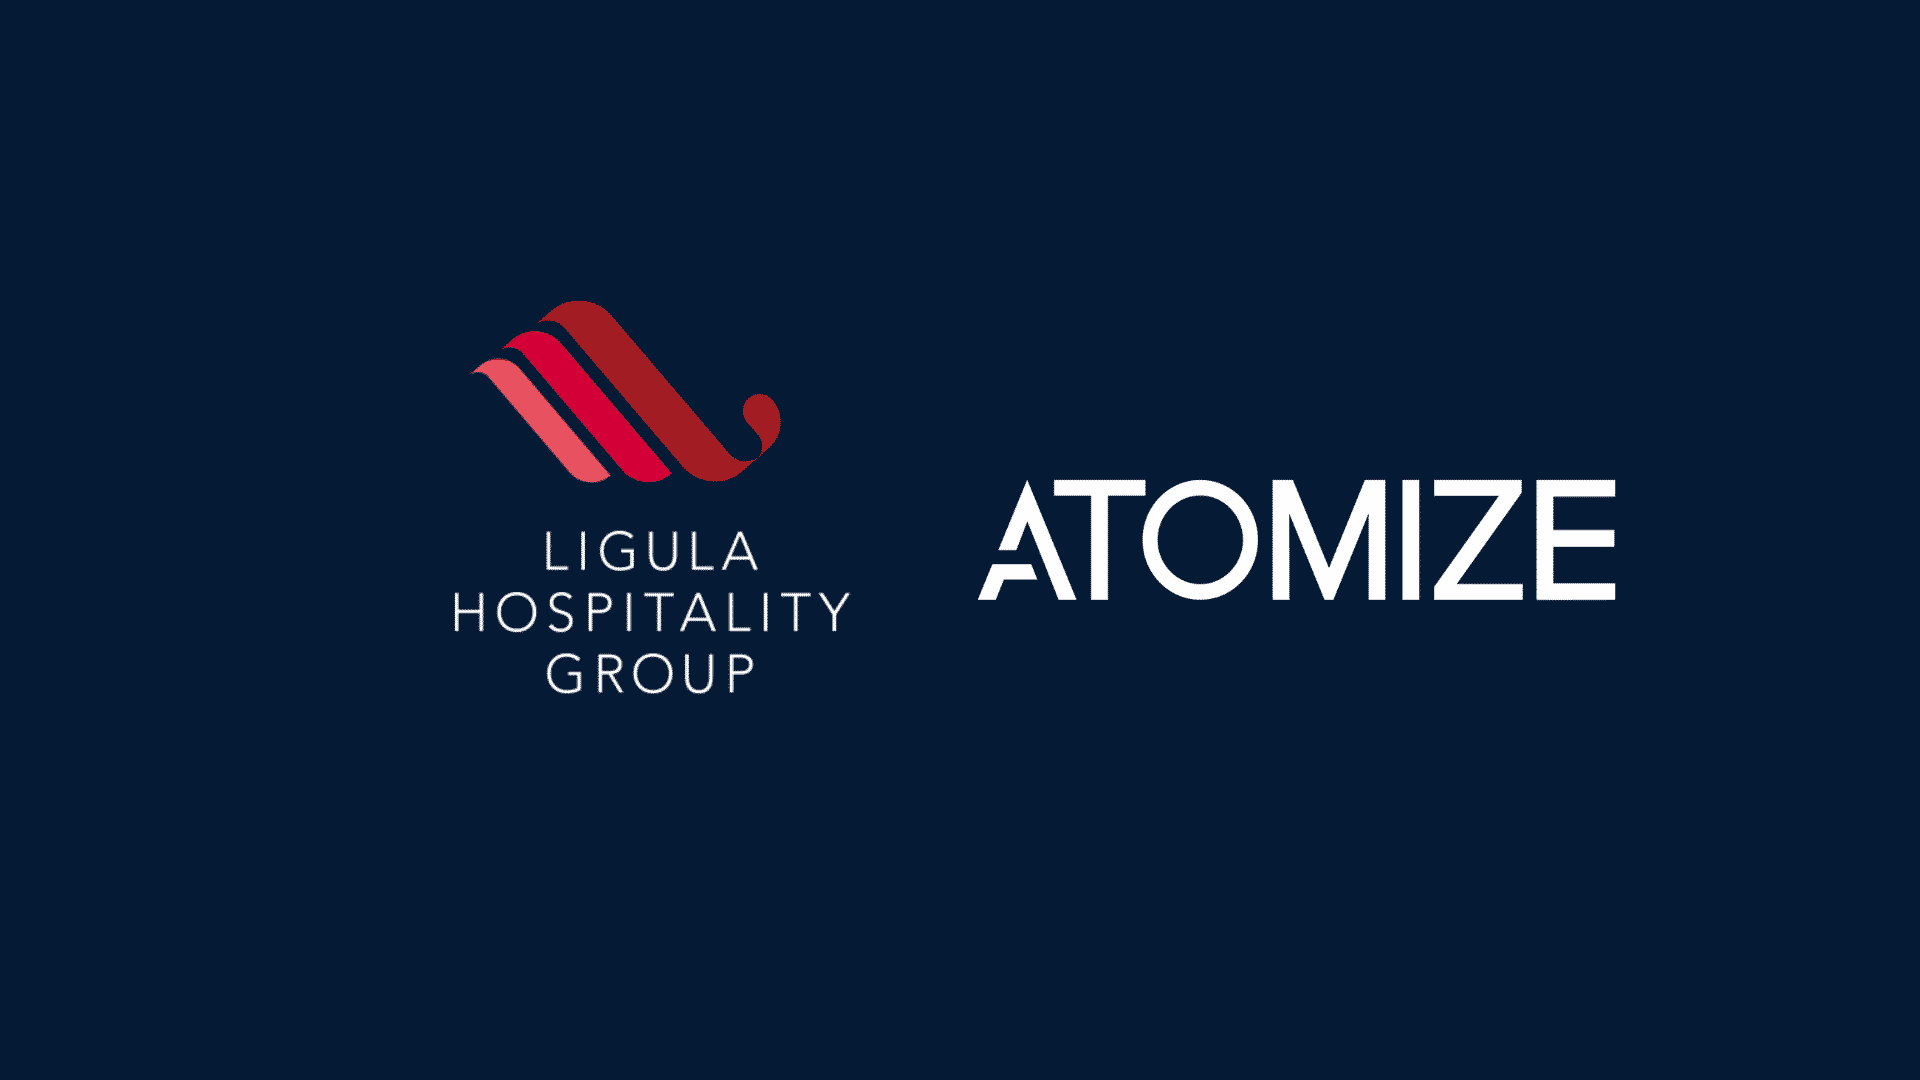 ligula hospitality group choose atomize automated pricing solution